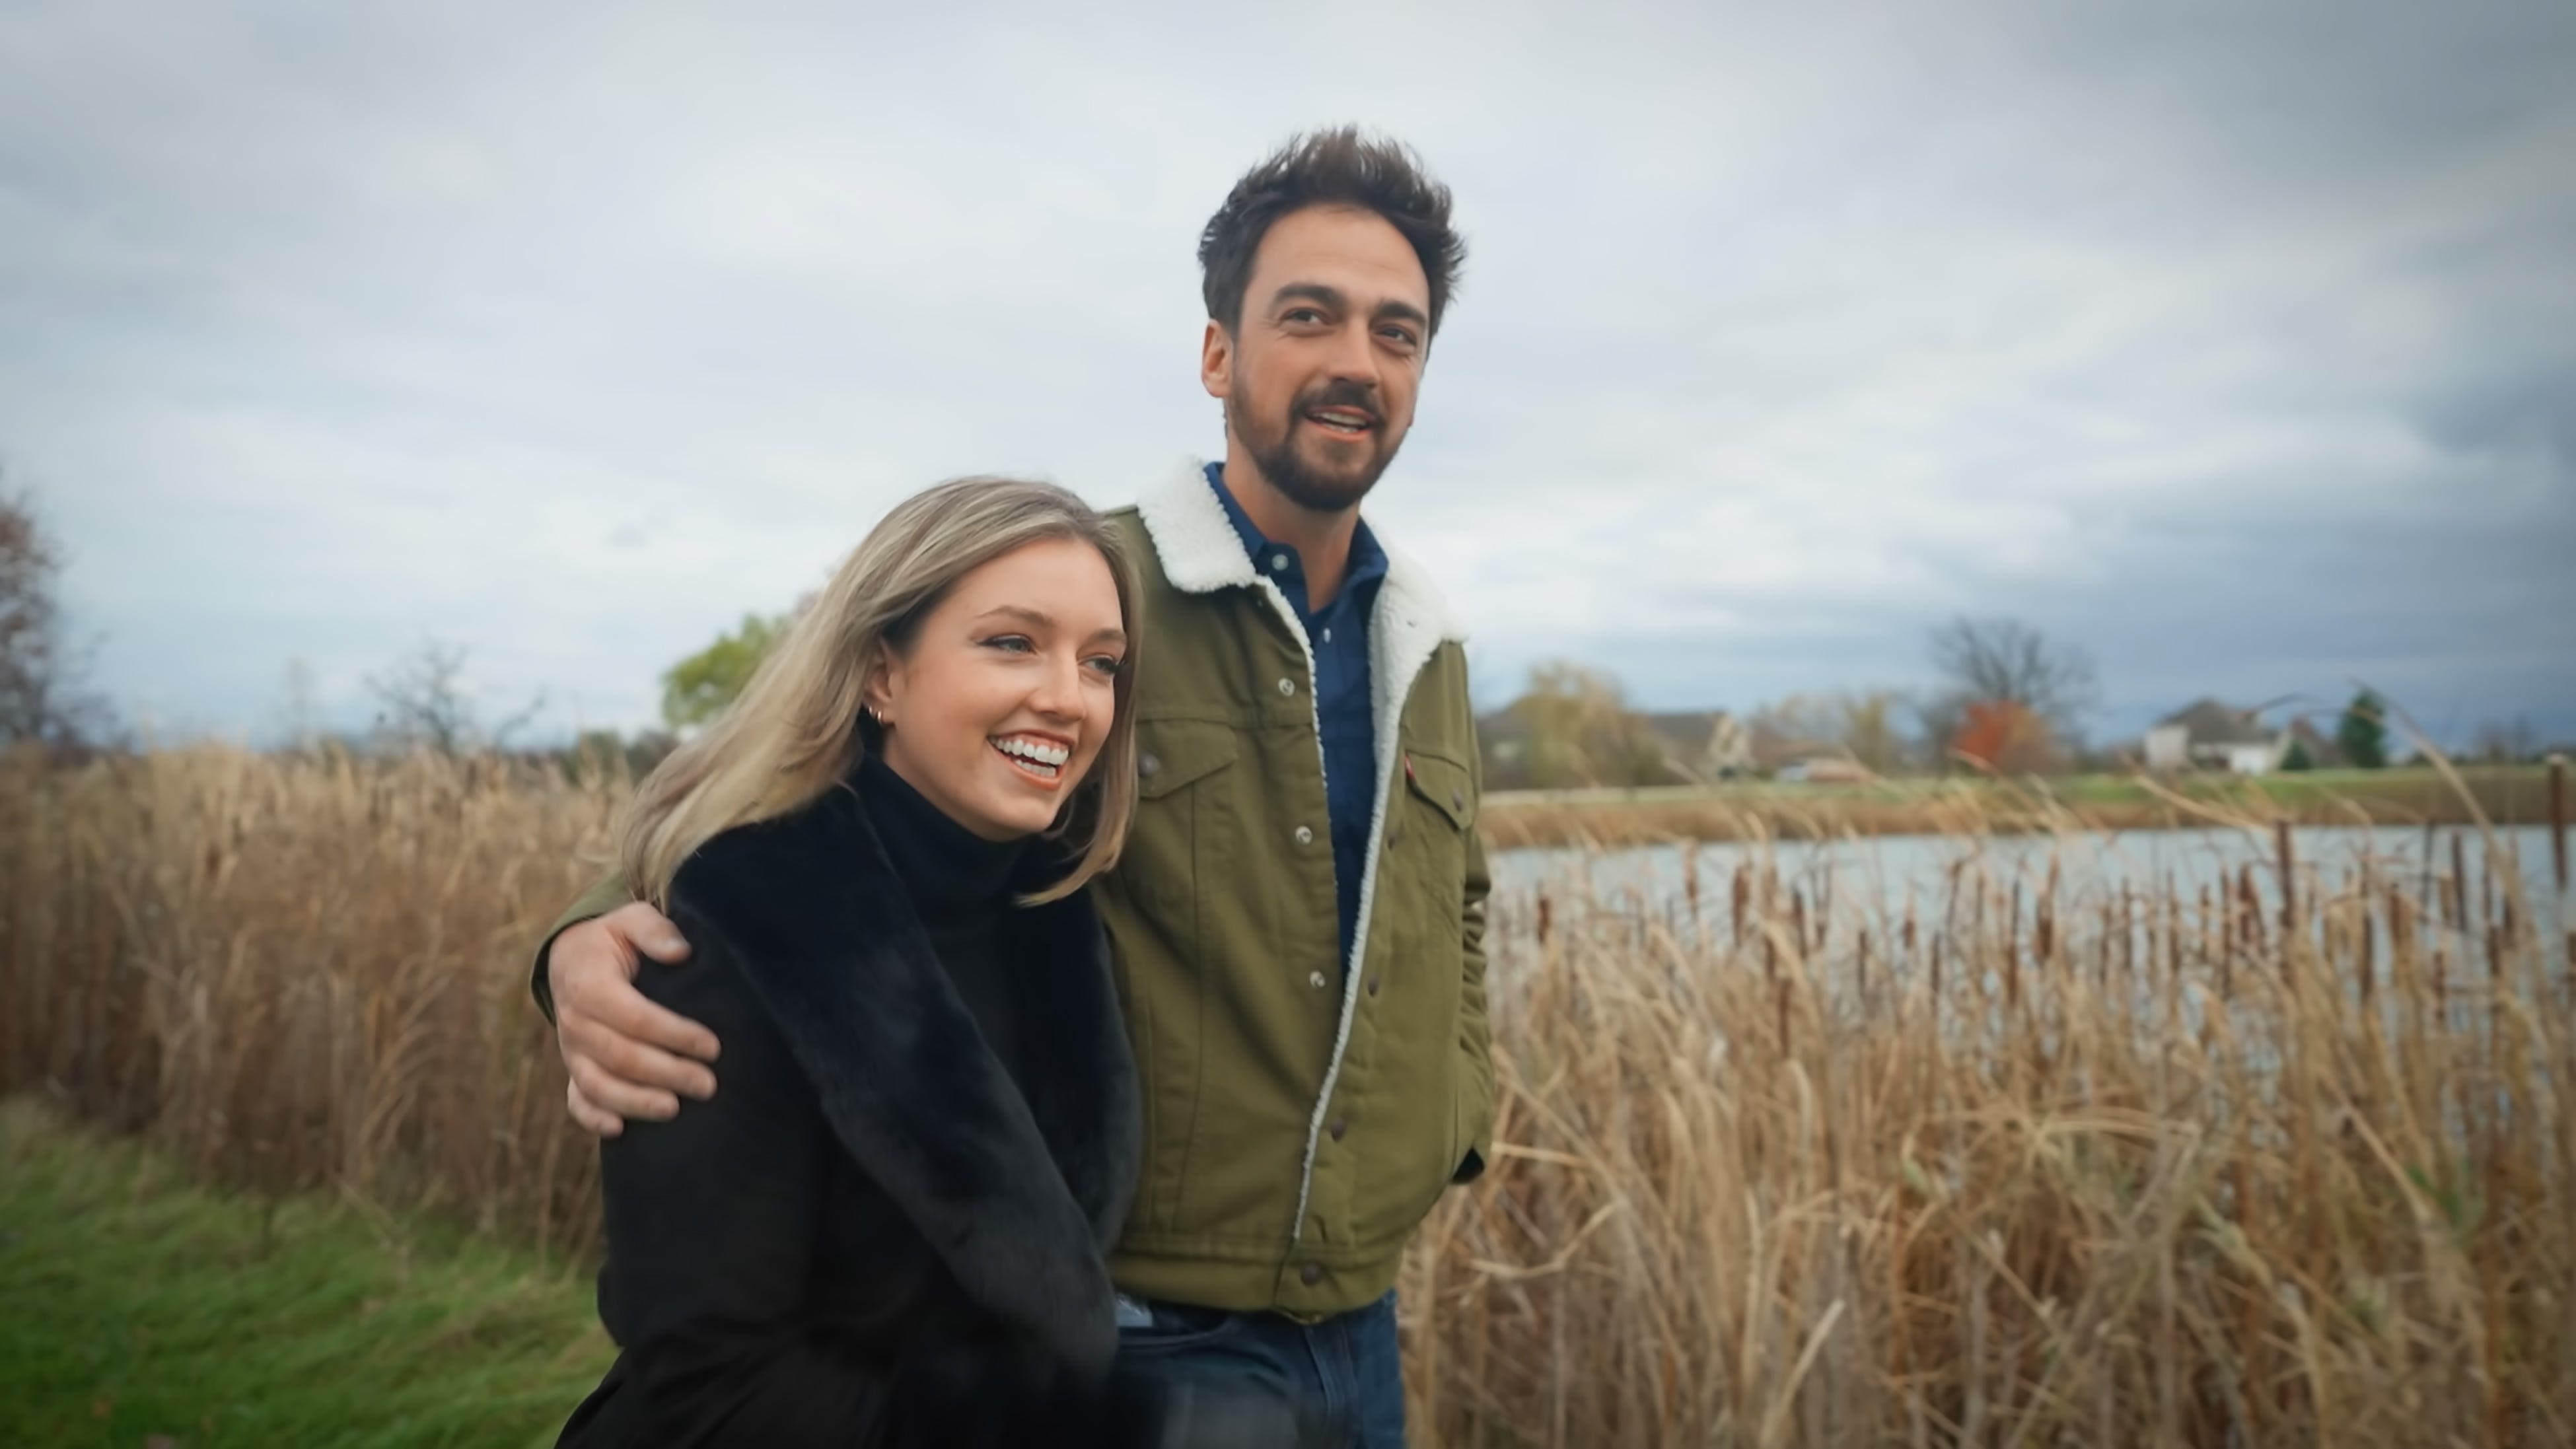 Farmer Brandon came to Wisconsin to meet Grace's family on 'Farmer Wants a Wife.' So, what did they think?